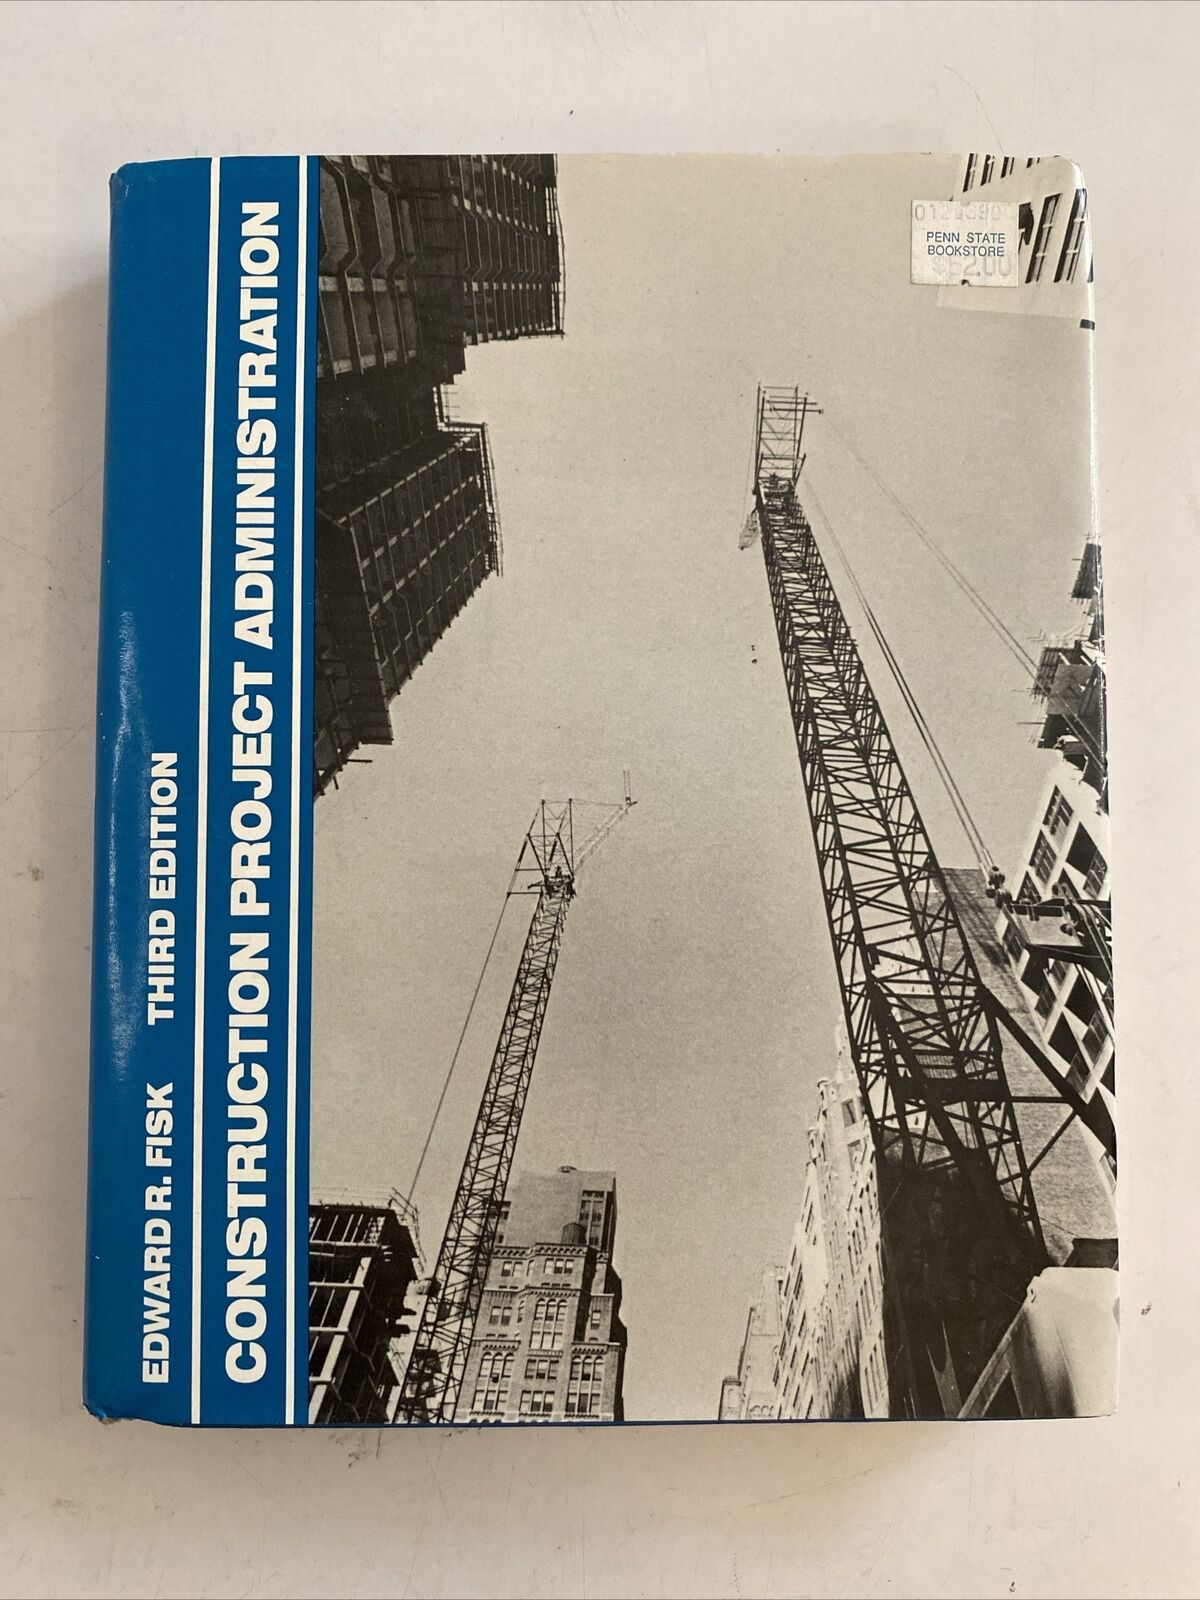 Construction Project Administration 3rd Edition by Edward R Fisk